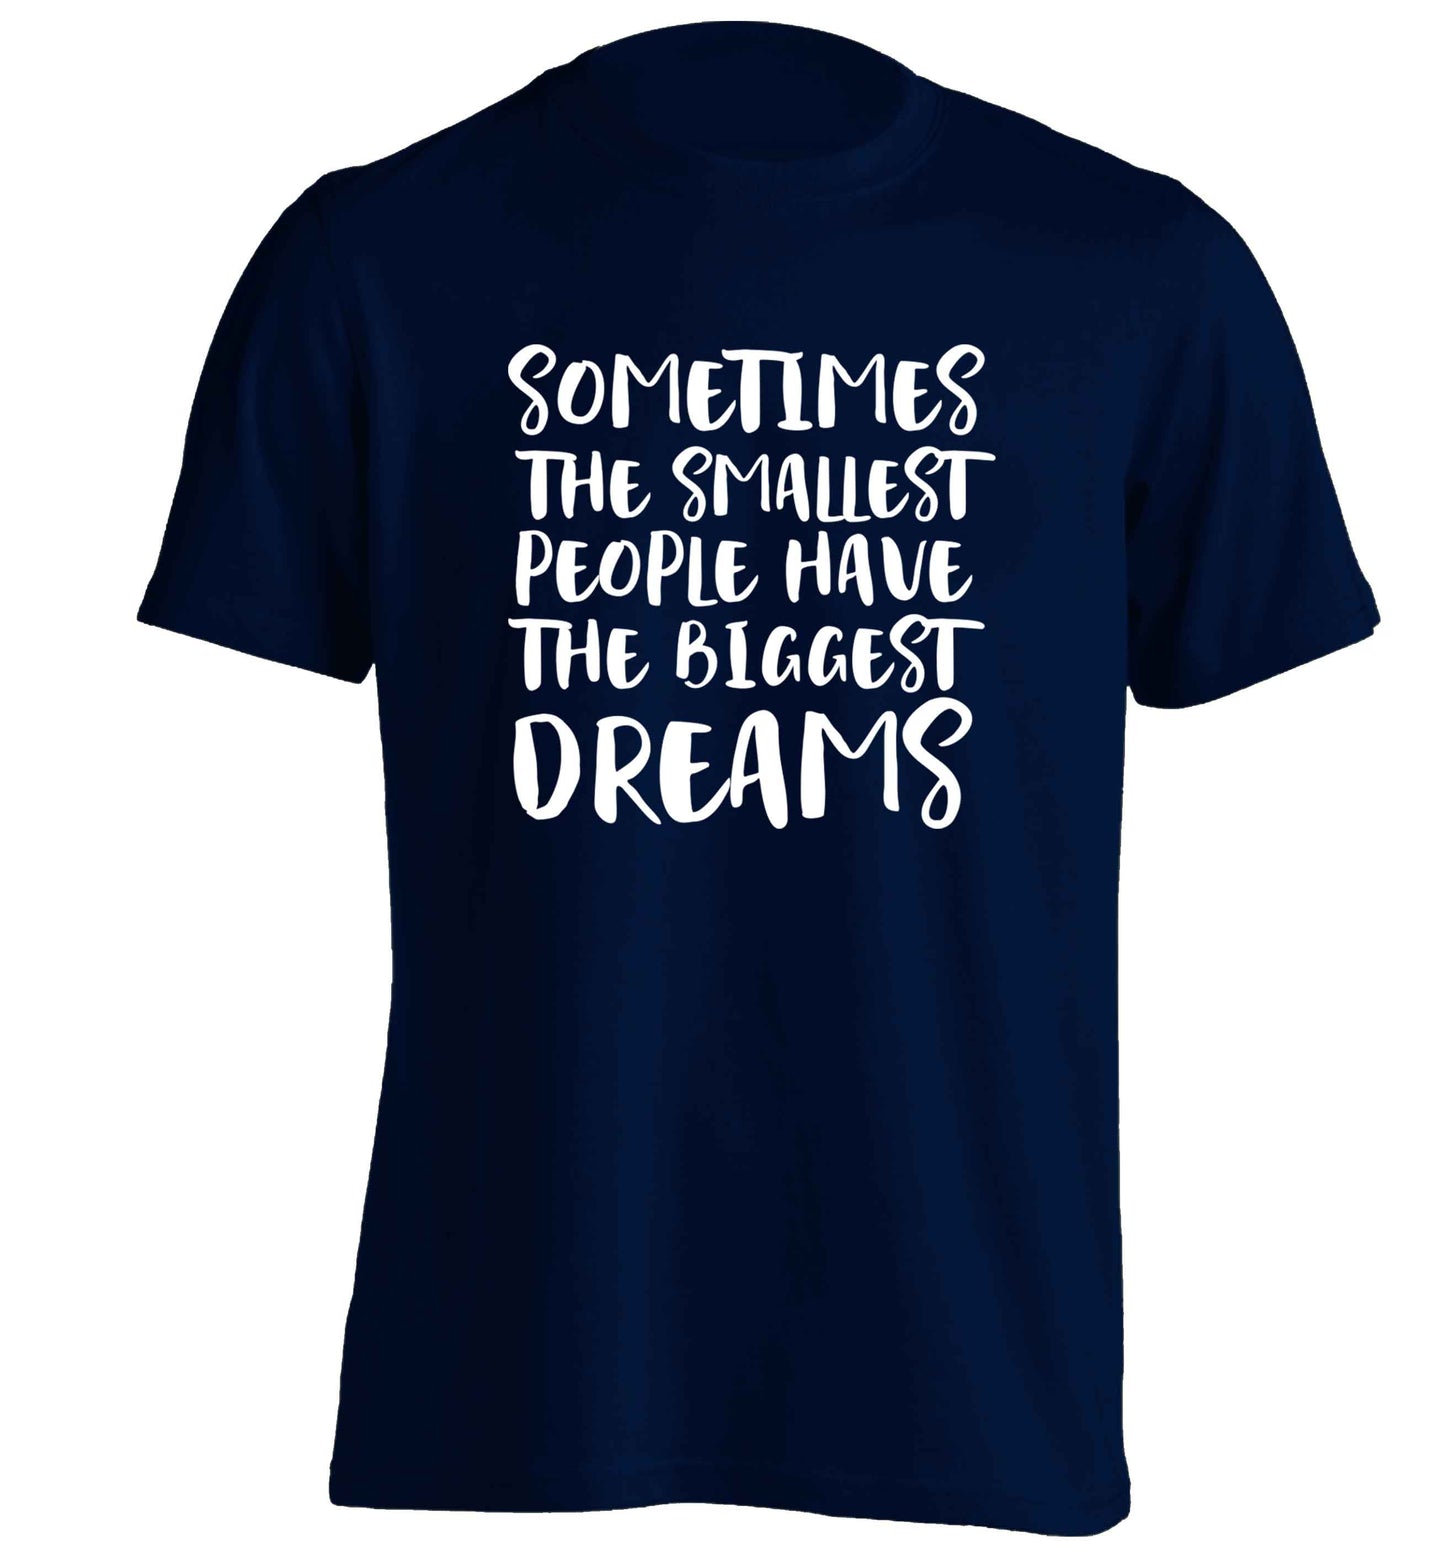 Sometimes the smallest people have the biggest dreams adults unisex navy Tshirt 2XL